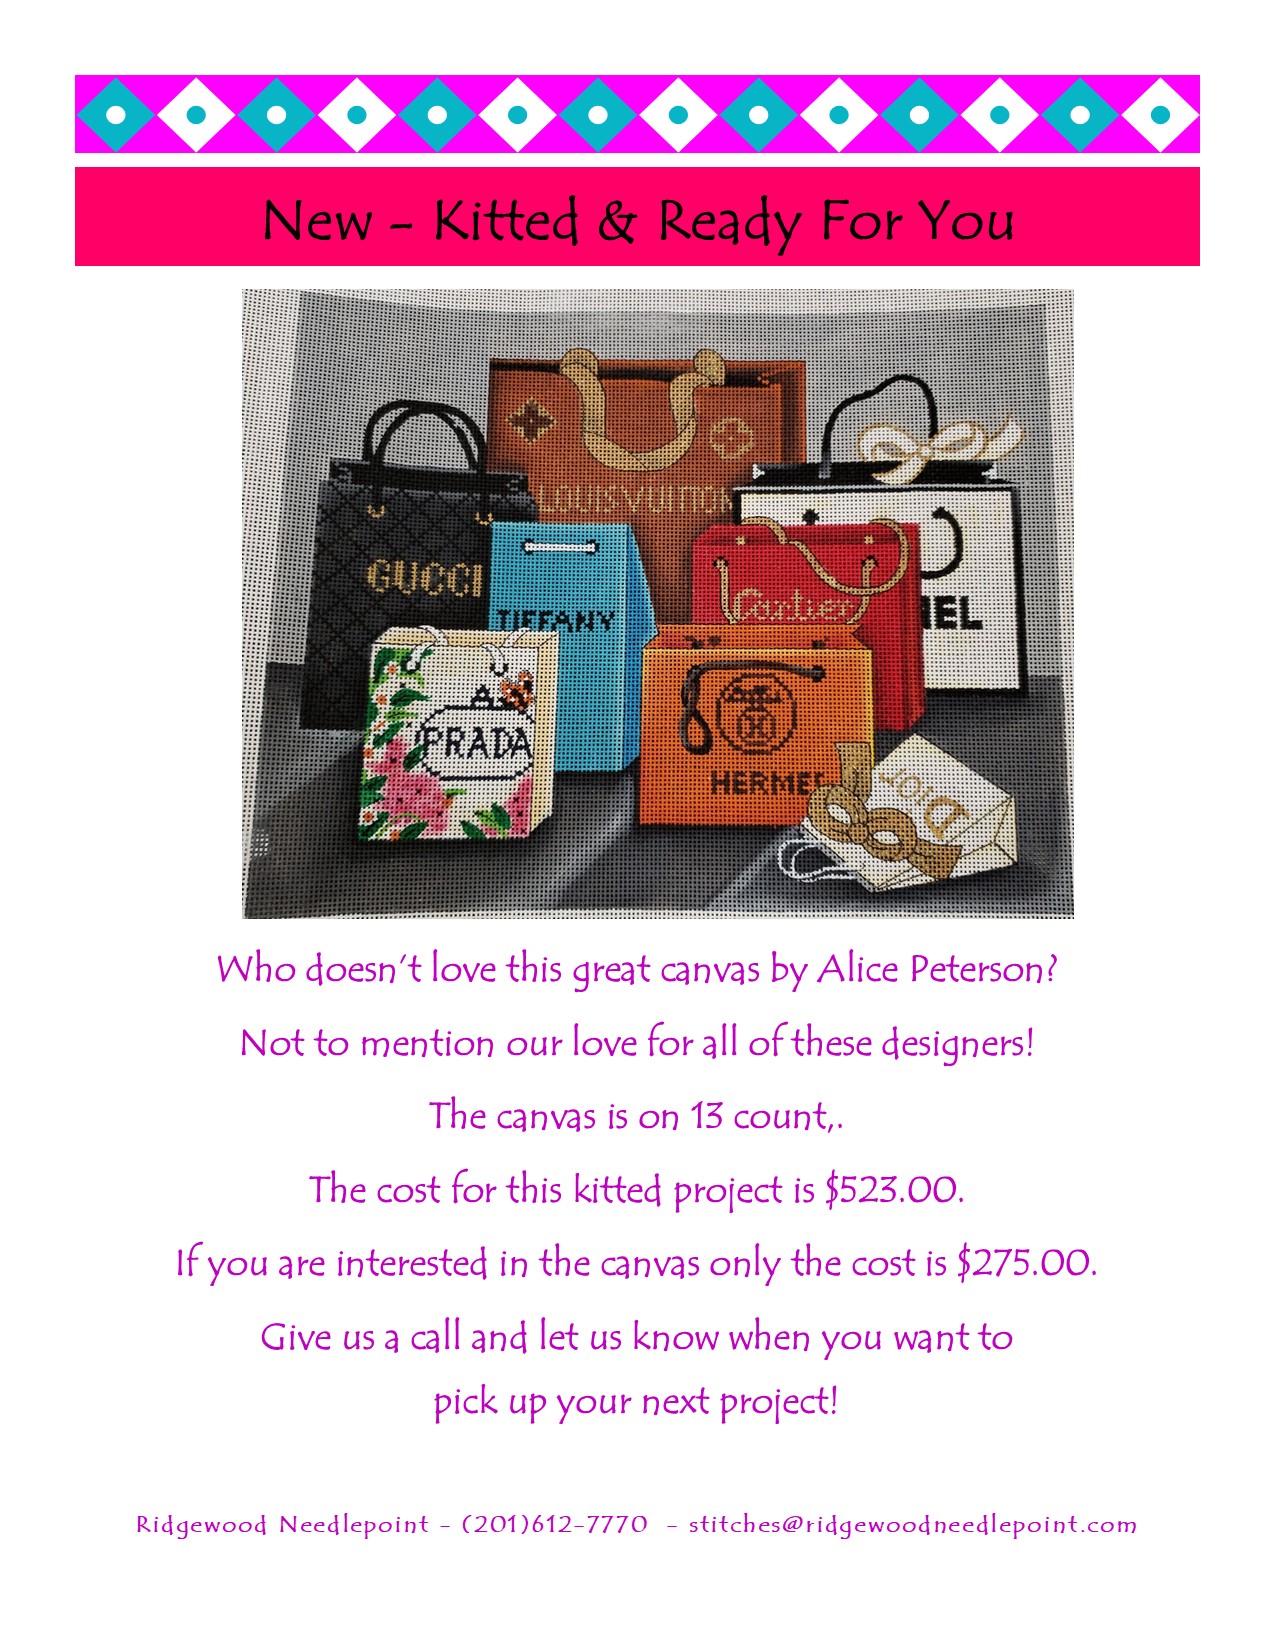 Alice Peterson Gift Bags – 8-4-21